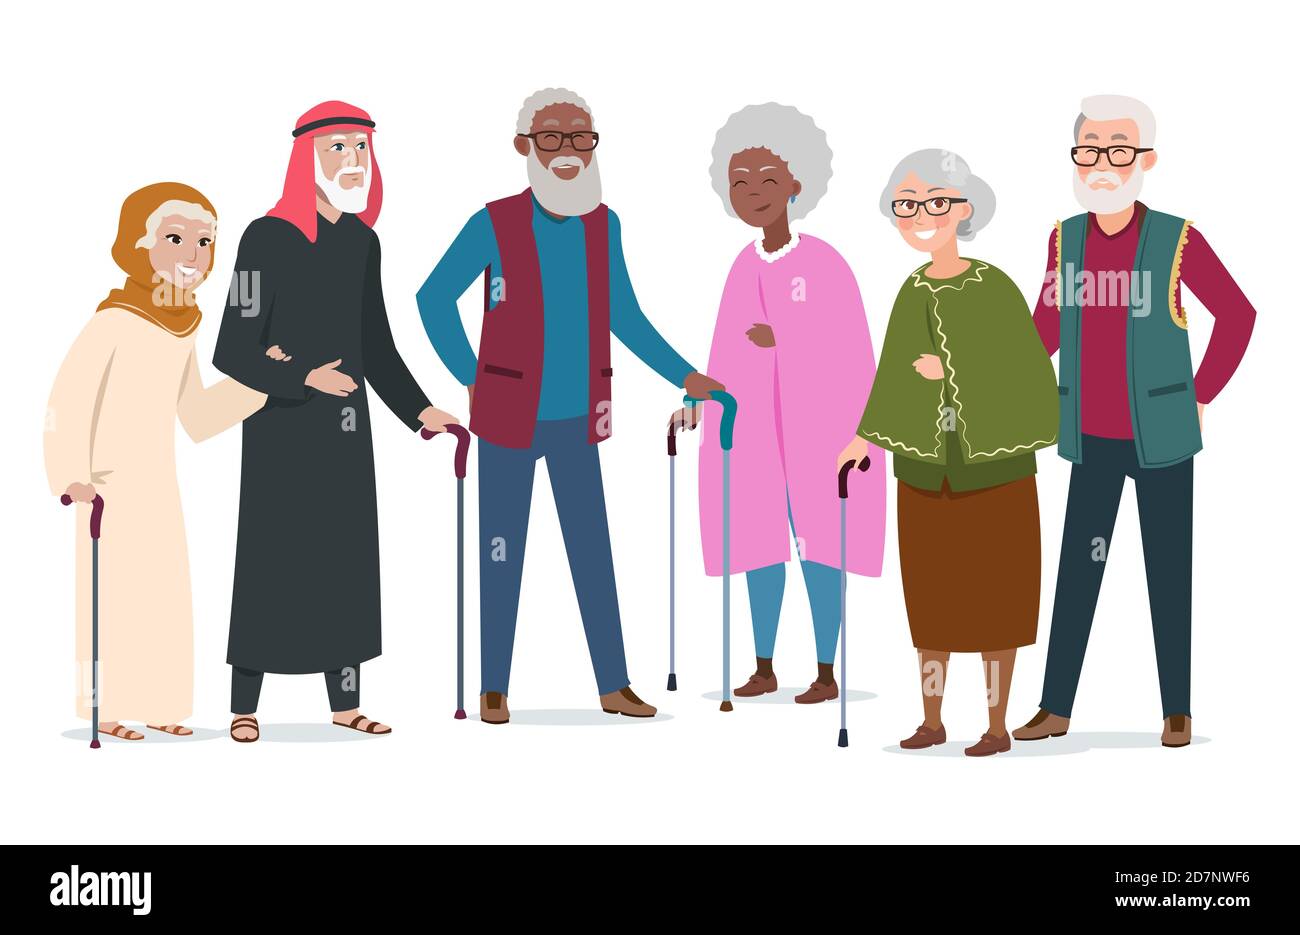 International happy old people. Elderly afroamericans, muslims and caucasians vector illustration. Arab islam people, muslim grandmother, together multicultural people Stock Vector